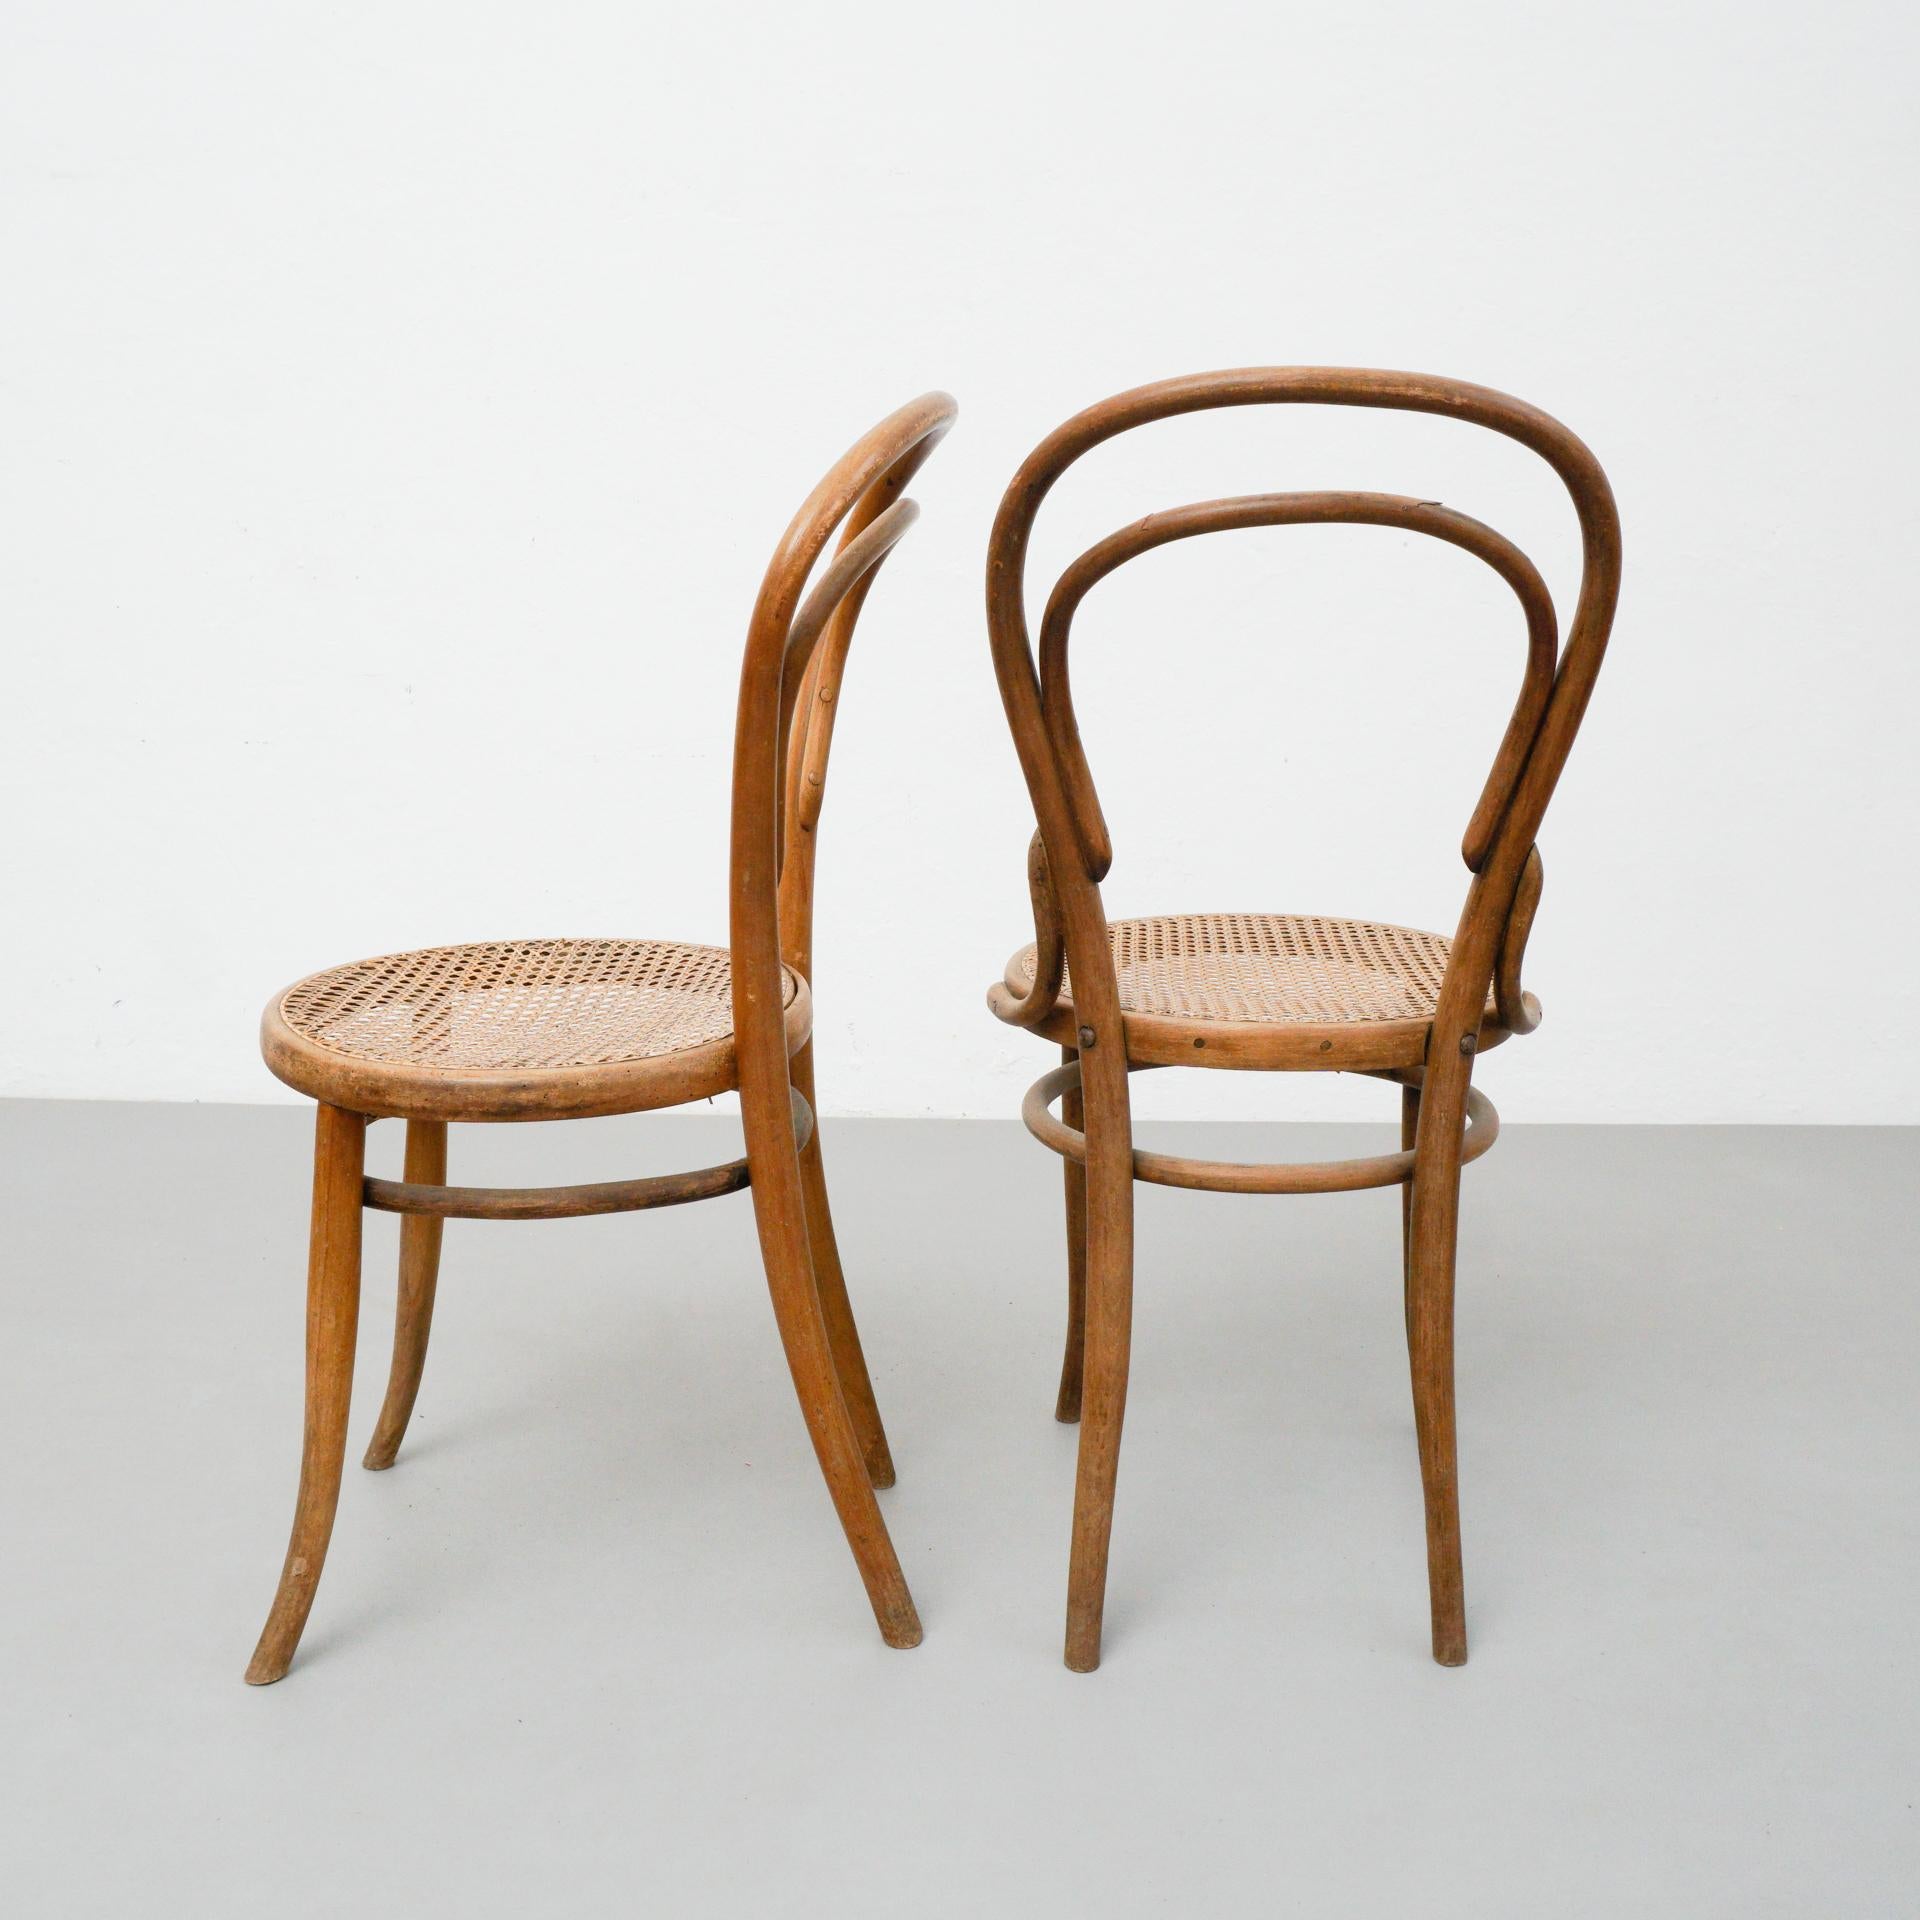 French Pair of Chairs in the Style of Thonet by Unknown Designer, circa 1930